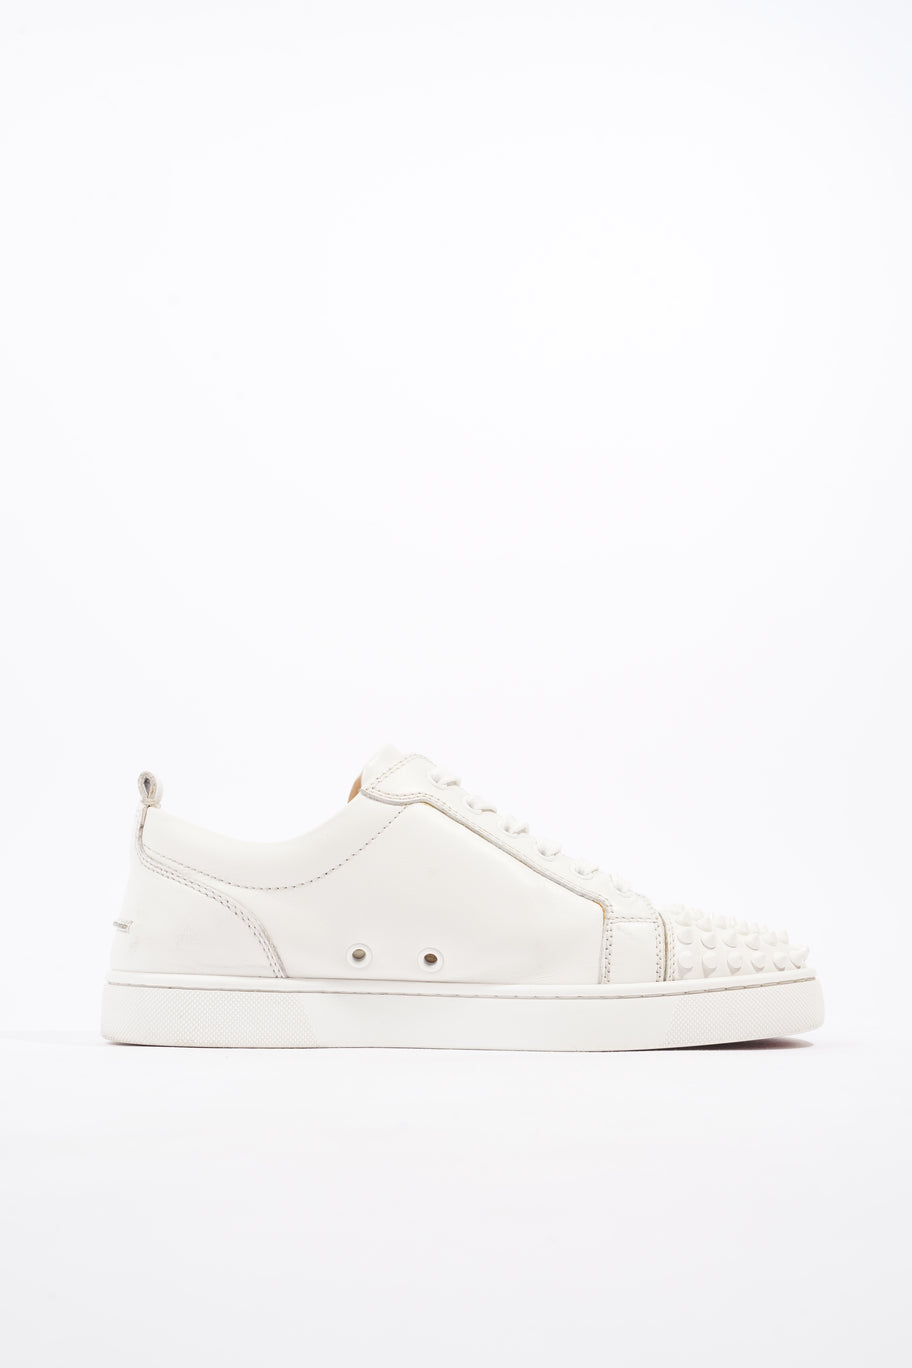 Louis Junior Spikes Sneakers White Leather EU 41 UK 7 Image 4